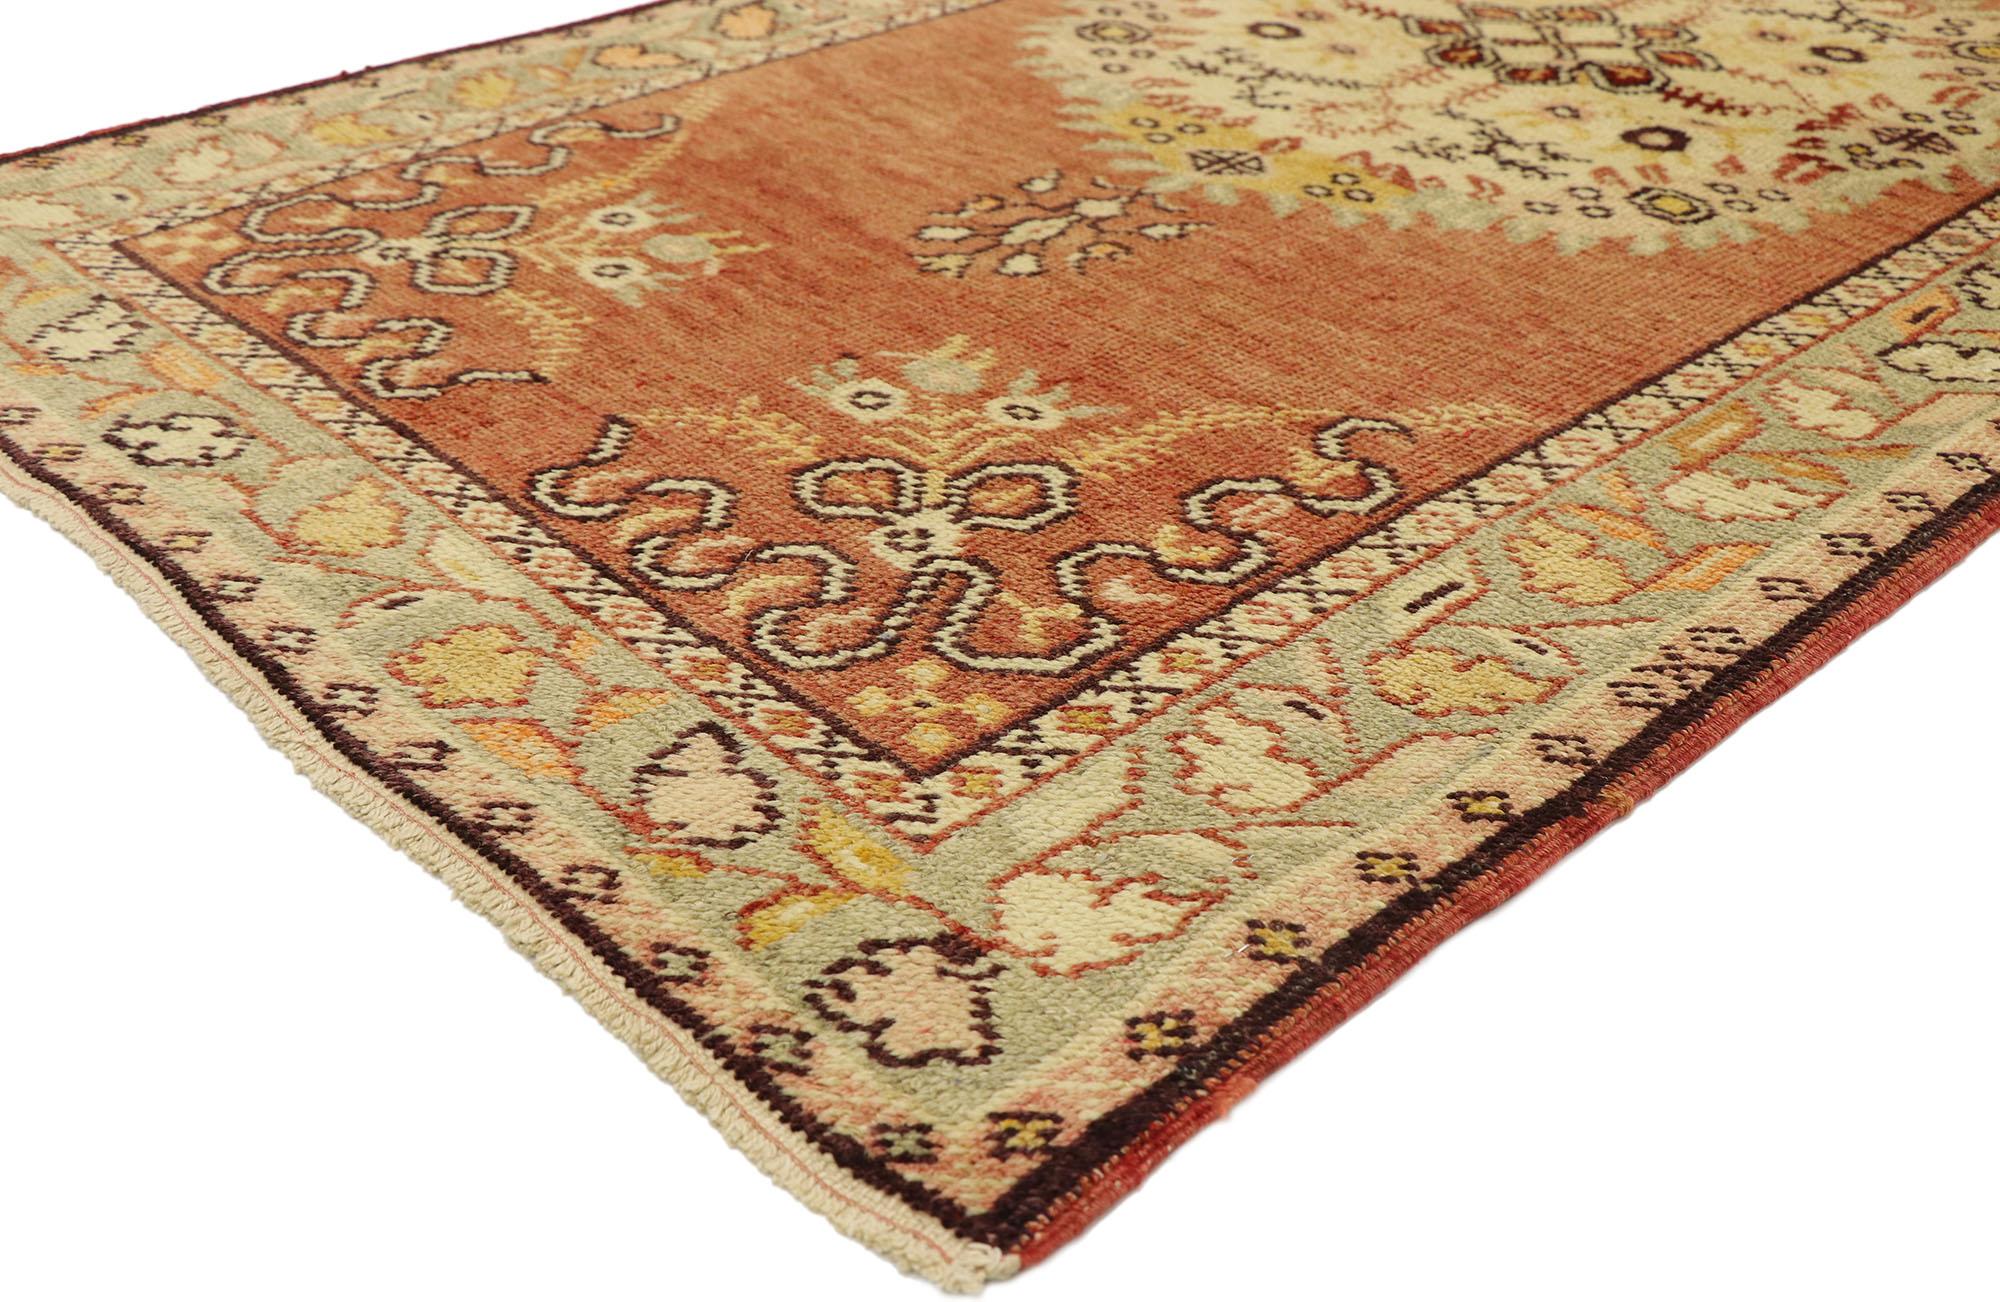 50655 vintage Turkish Oushak rug with Rustic French Rococo style. Balancing rustic sensibility with romantic connotations, this hand knotted wool vintage Turkish Oushak rug beautifully embodies a French Rococo vibes. The abrashed terra cotta field